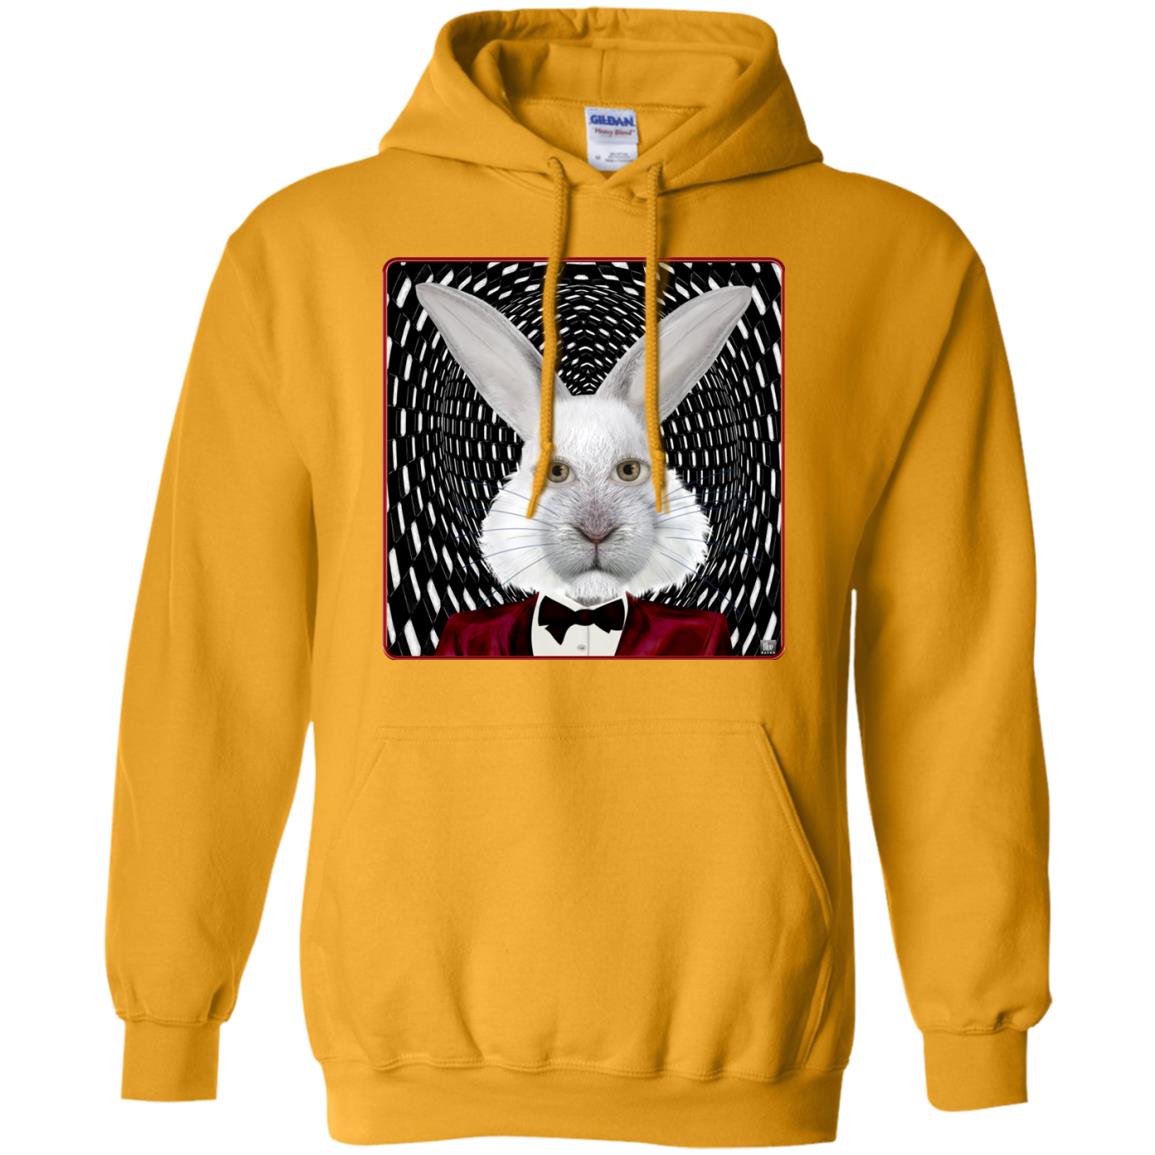 the white rabbit - Adult Hoodie